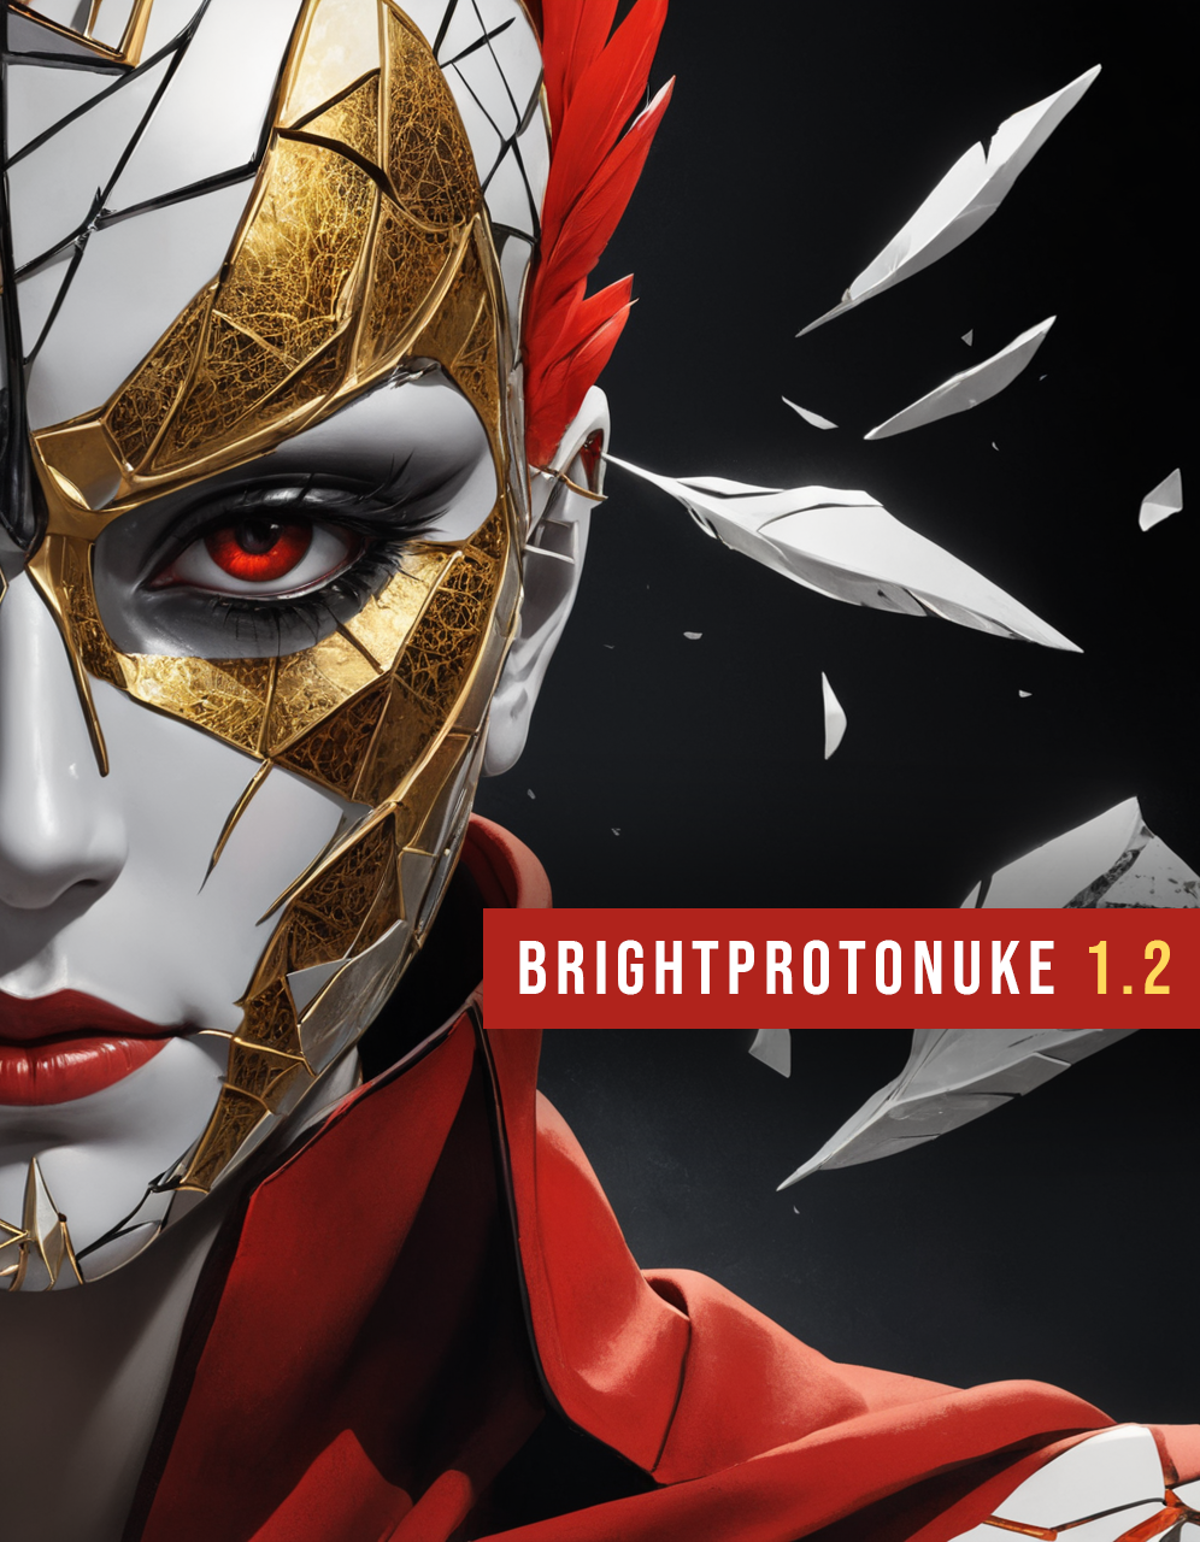 The cover of Brightprotonke 1.2, featuring a woman with a mask on her face.